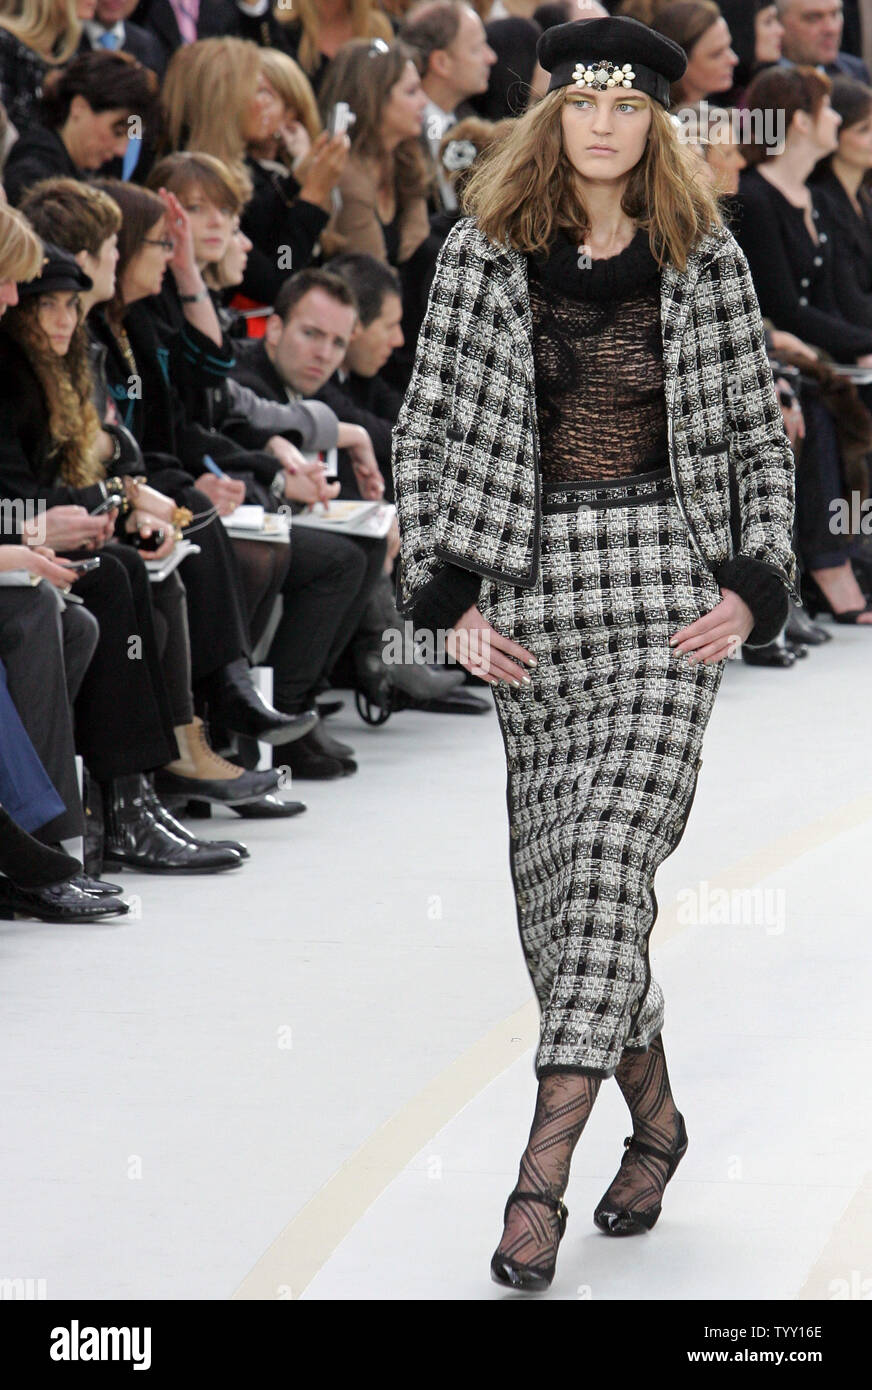 A model wears an outfit by German fashion designer Karl Lagerfeld  for Chanel at the Fall-Winter 2008/2009 ready-to-wear Paris Fashion Week, February 29, 2008. (UPI Photo) Stock Photo